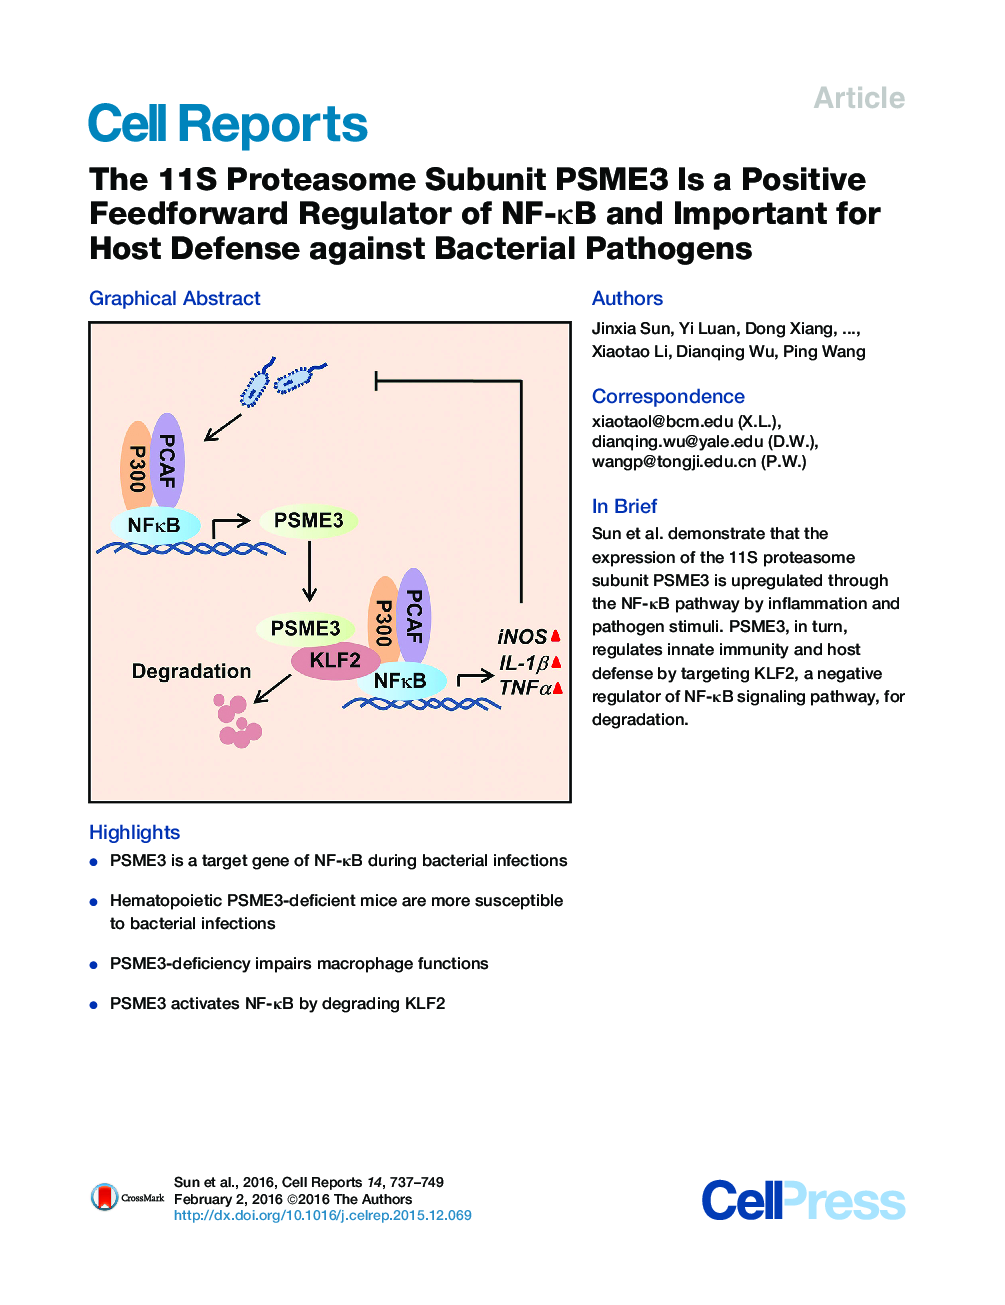 The 11S Proteasome Subunit PSME3 Is a Positive Feedforward Regulator of NF-κB and Important for Host Defense against Bacterial Pathogens 